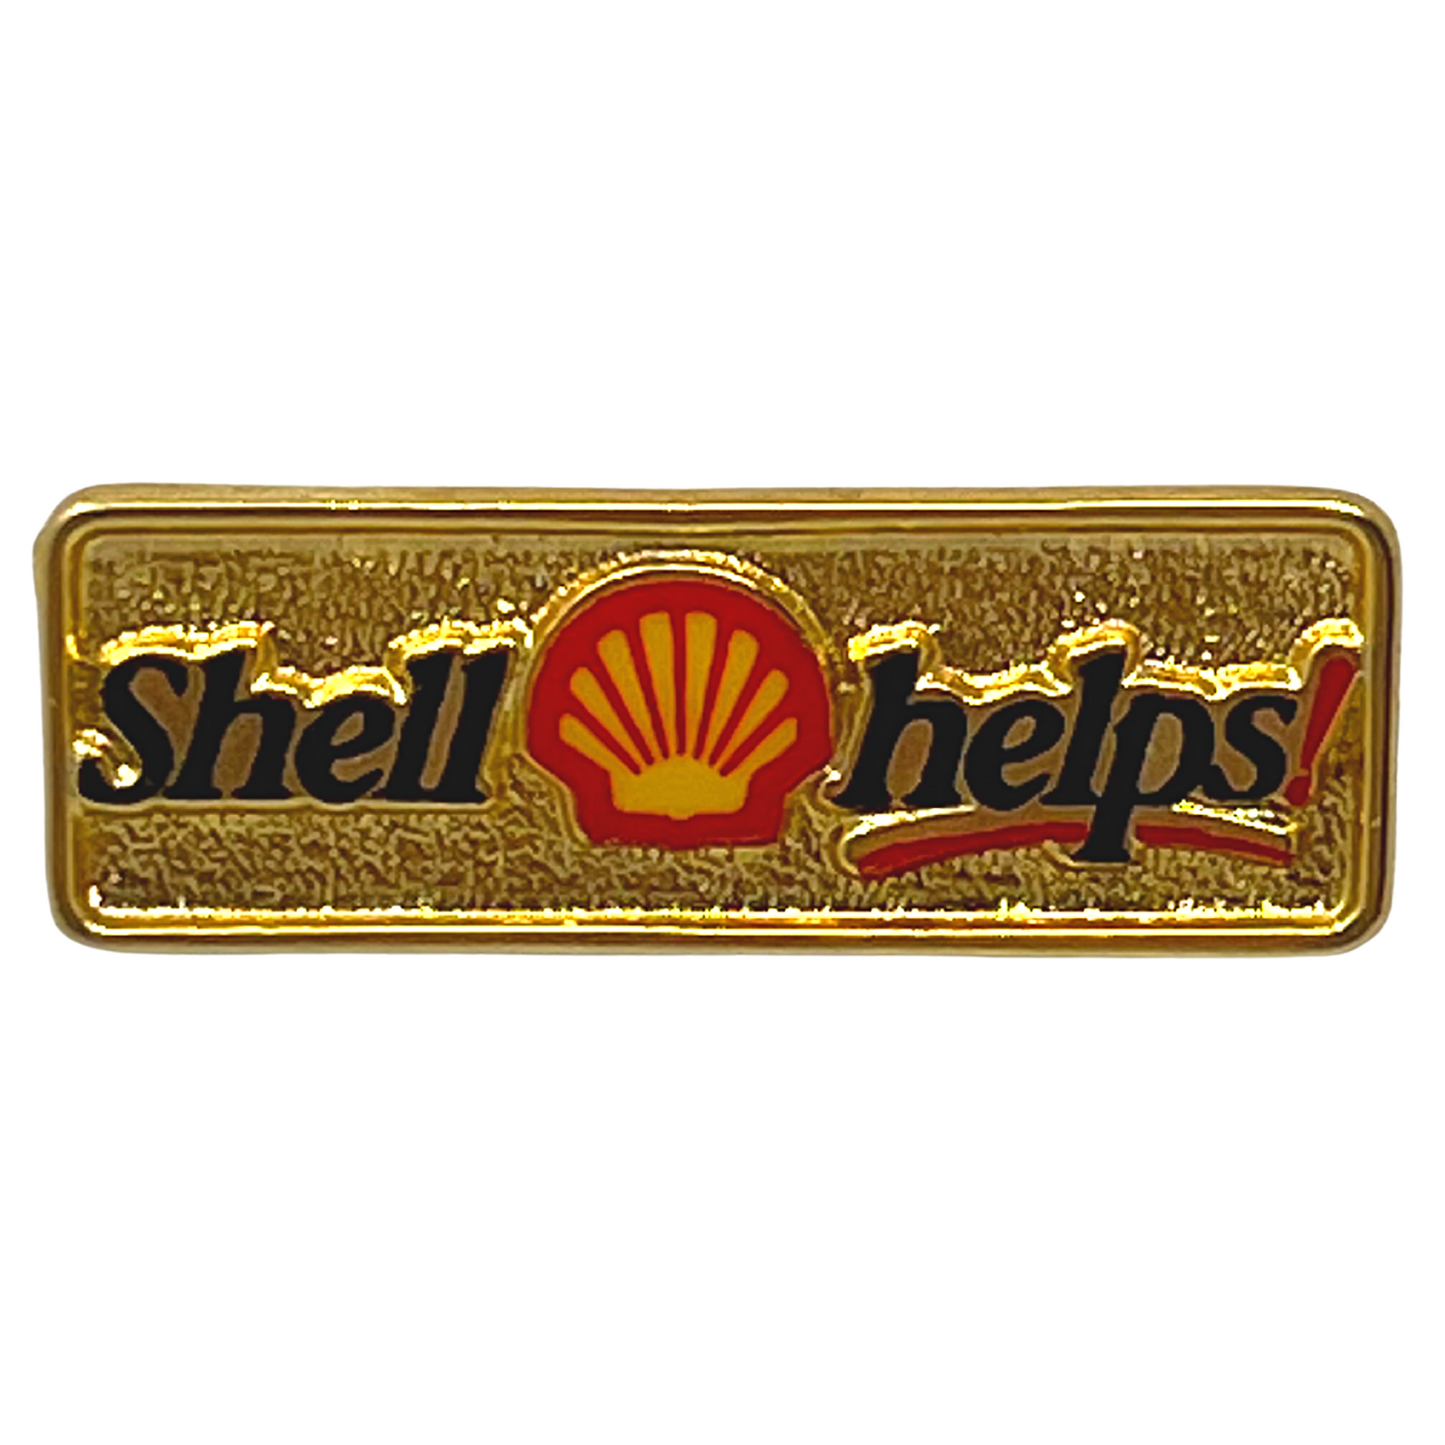 Shell Helps! Gas & Oil Lapel Pin